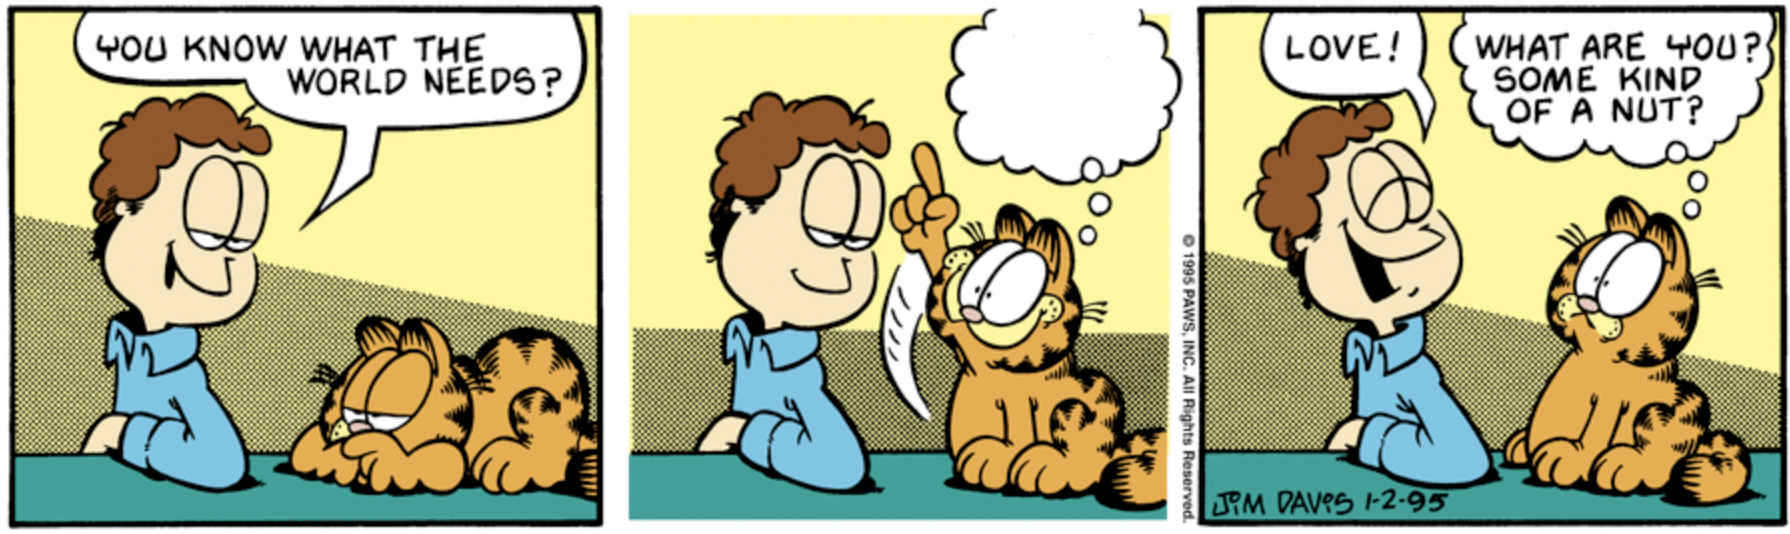 Garfield You Know What The World Needs? Blank Template - Imgflip